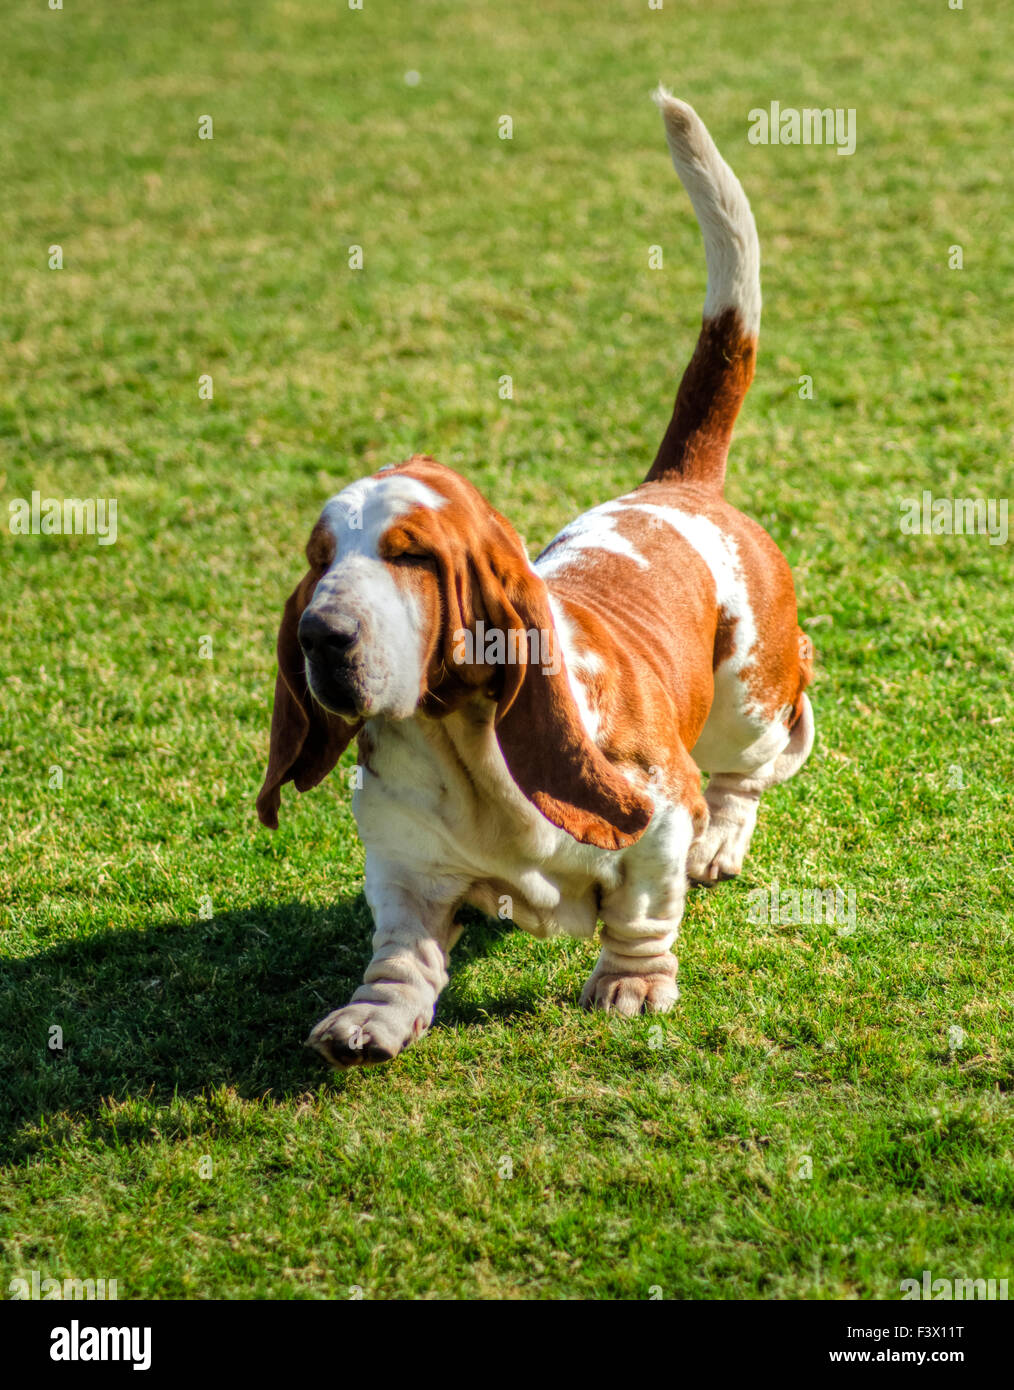 A beautiful, red and white Basset Hound dog walking on the lawn, distinctive for being short-legged, having hanging skin structu Stock Photo